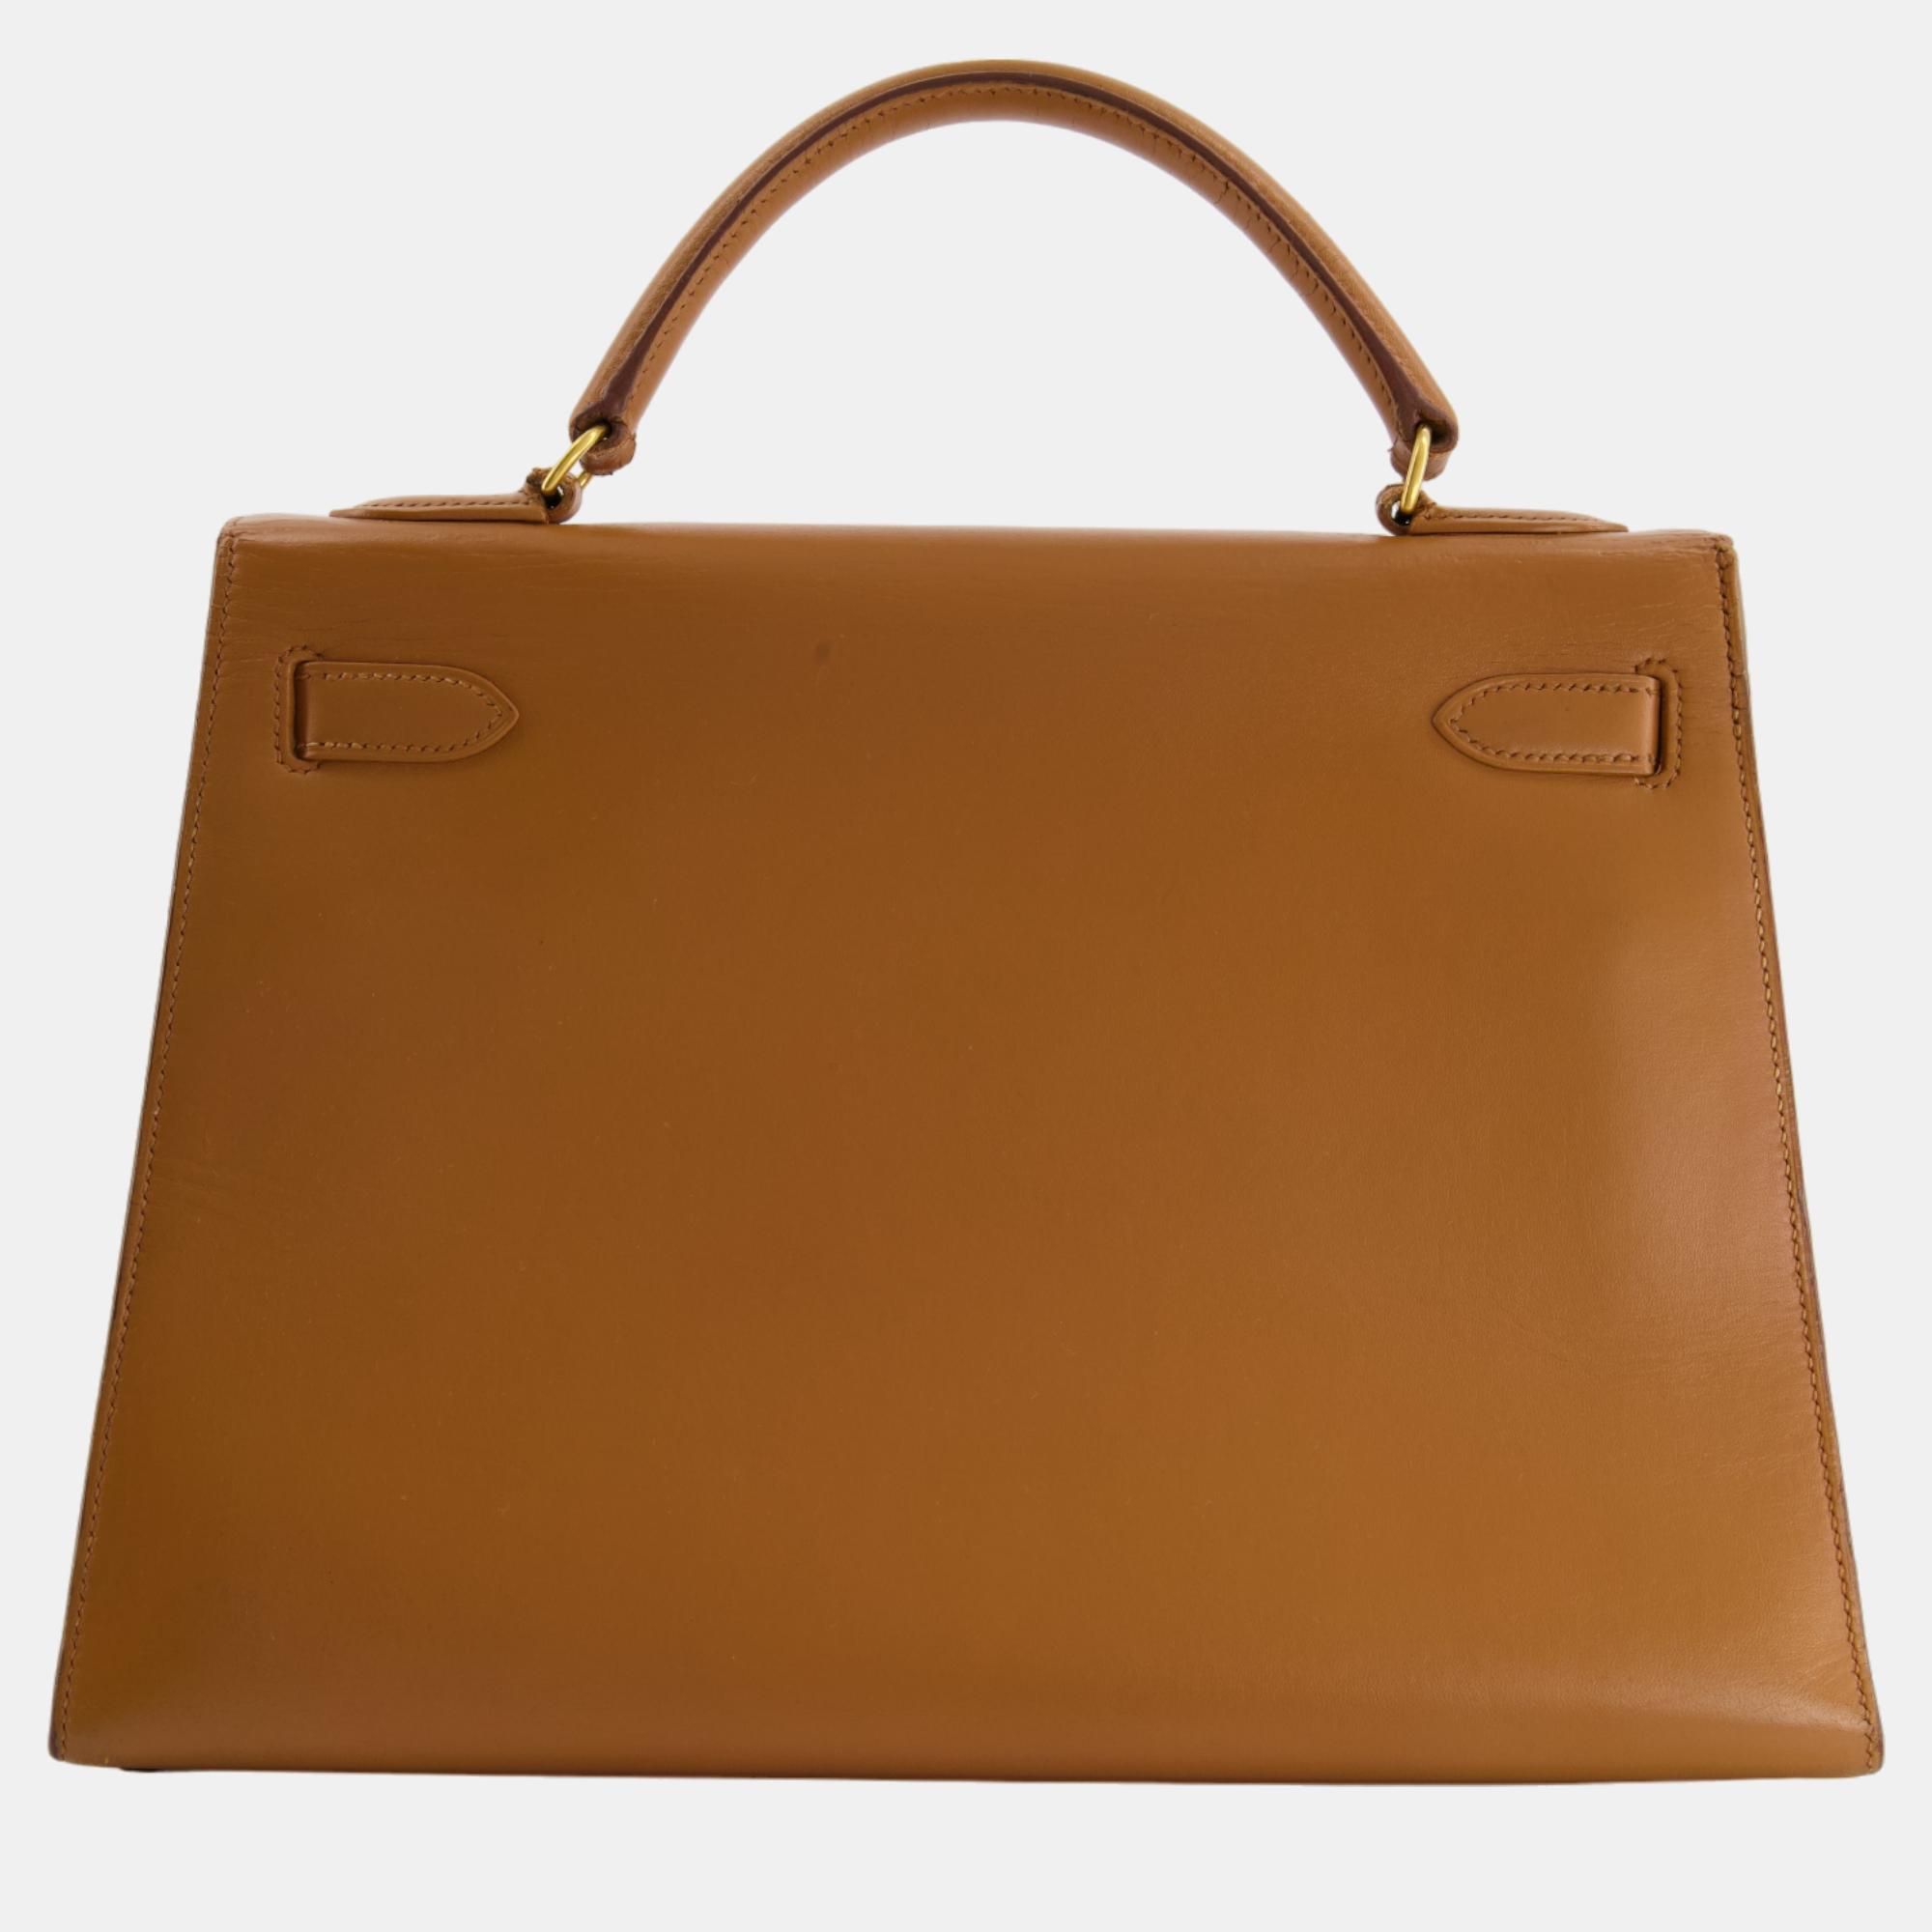 Hermes Vintage Kelly Bag 32cm In Gold Box Leather And Gold Hardware